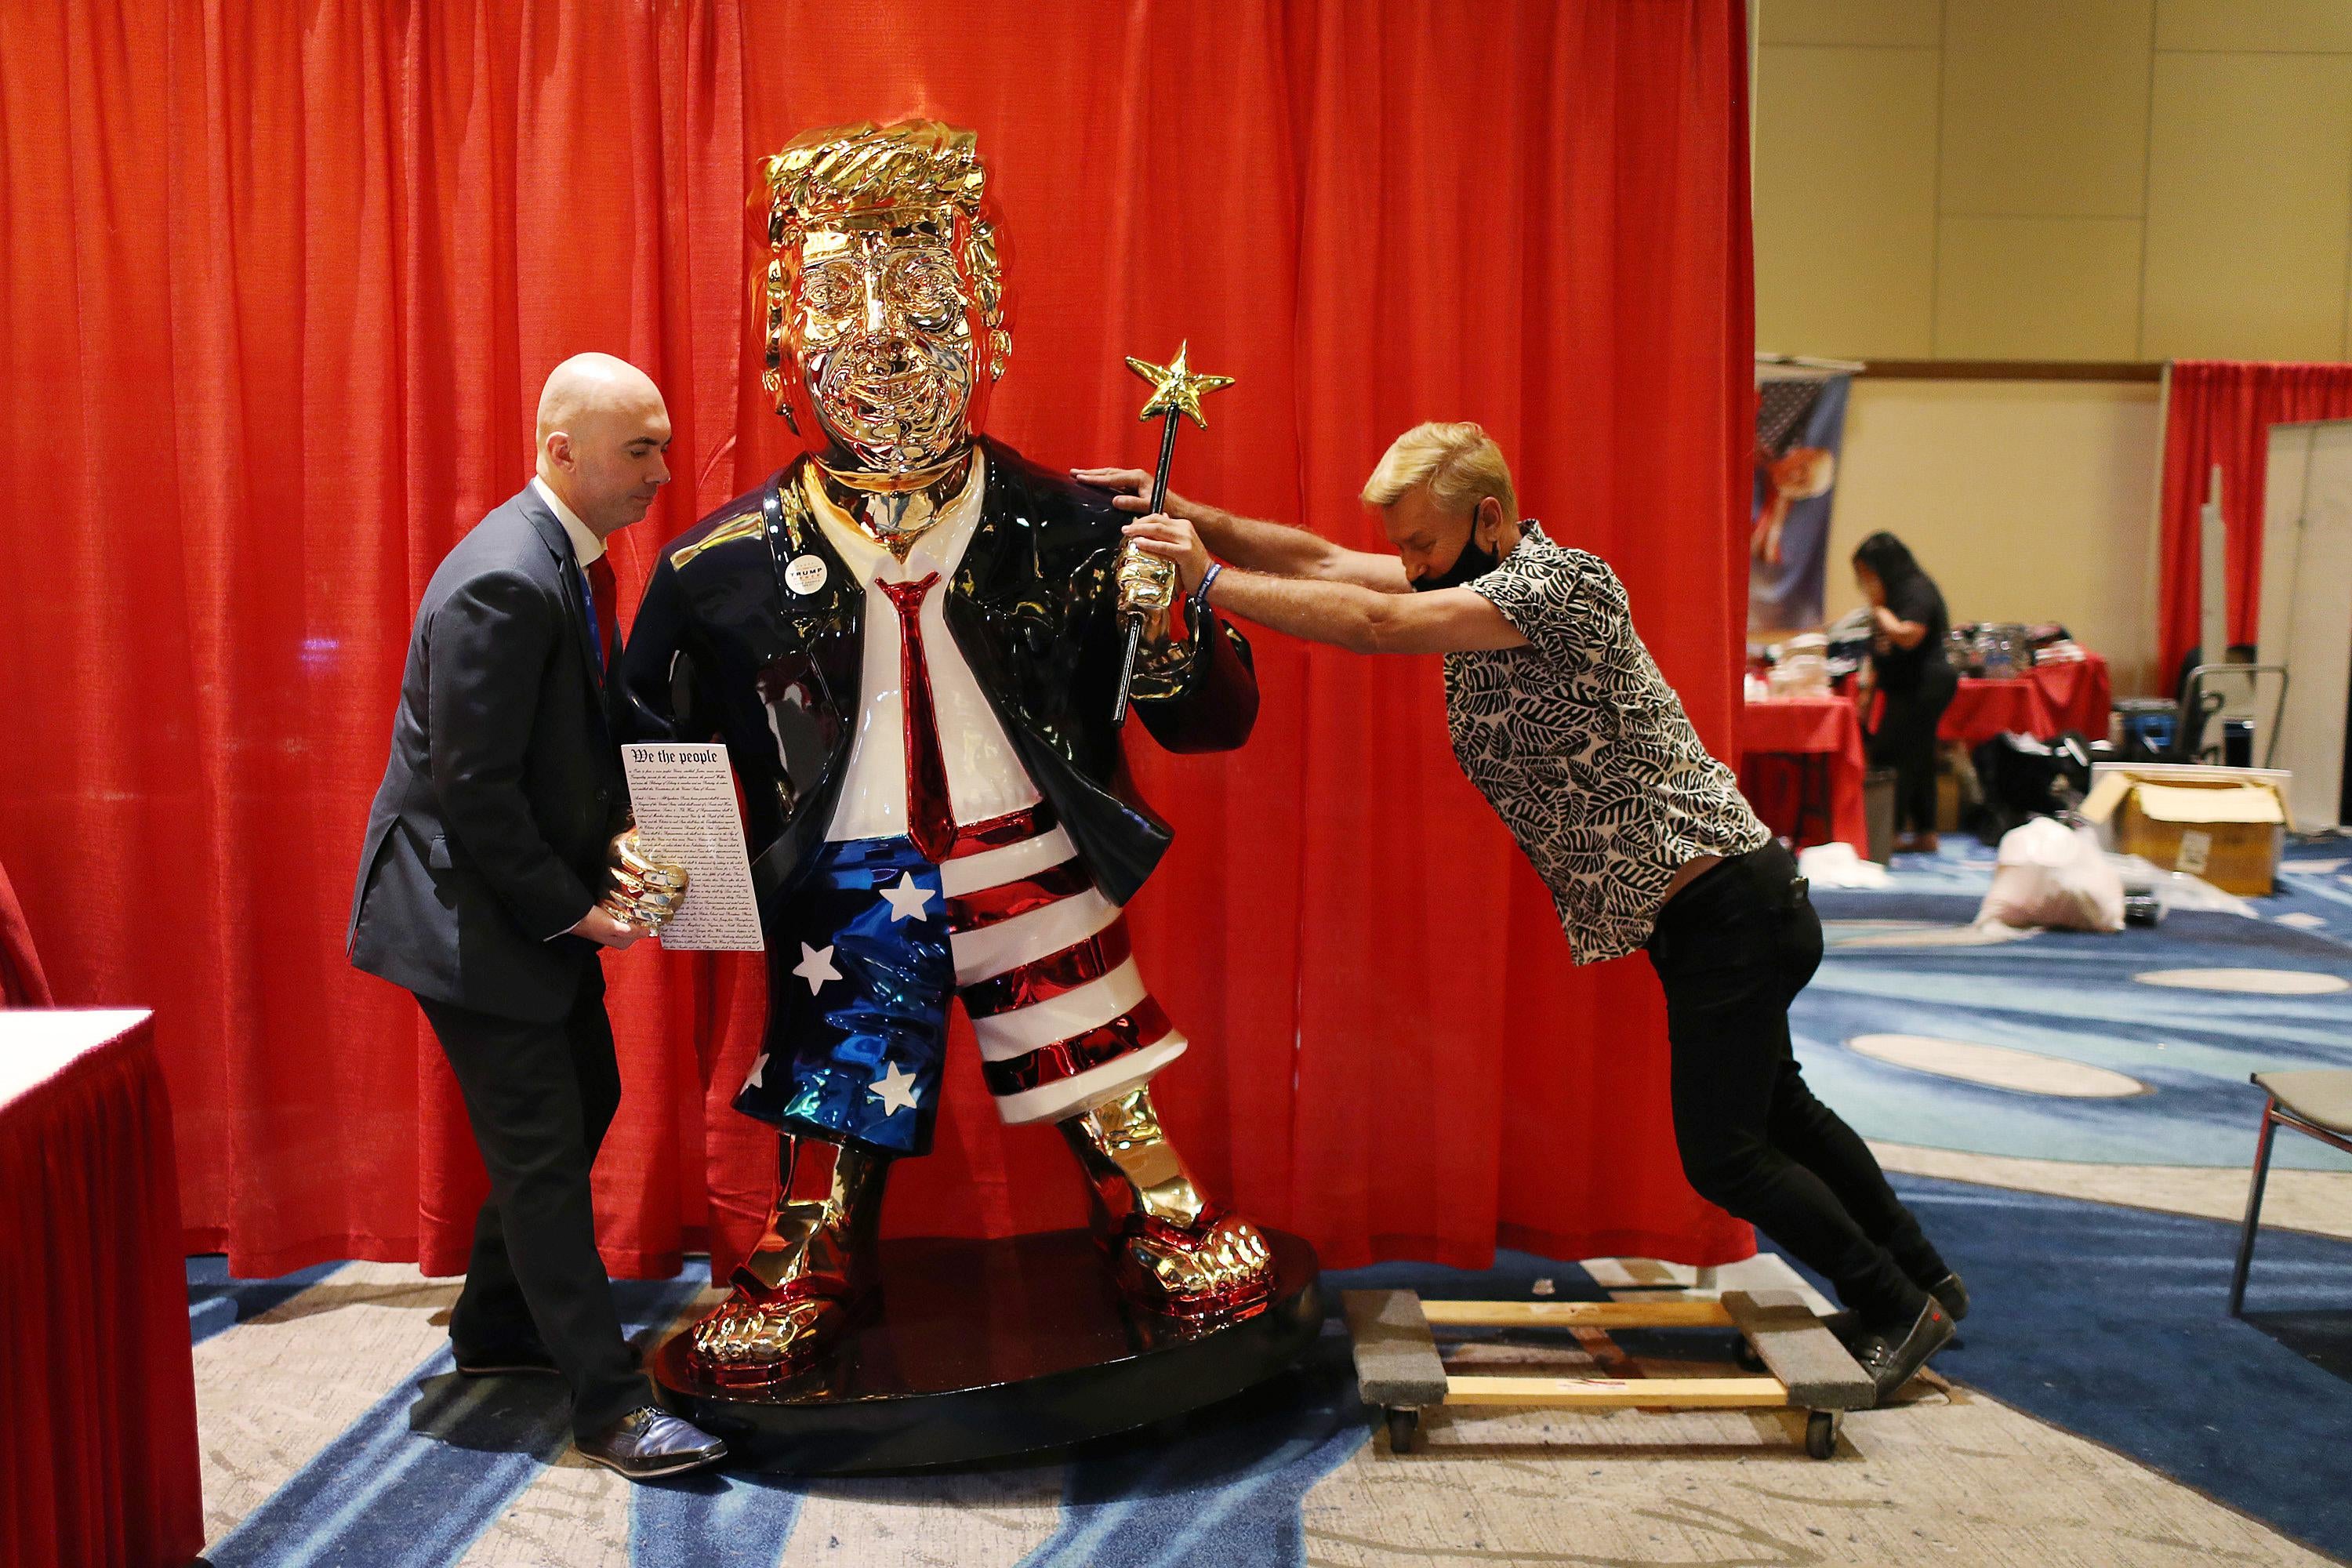 One man pushes one side of the golden Trump statue while the other man pulls from the other side. The statue depicts Trump wearing American flag shorts and holding a magic wand.